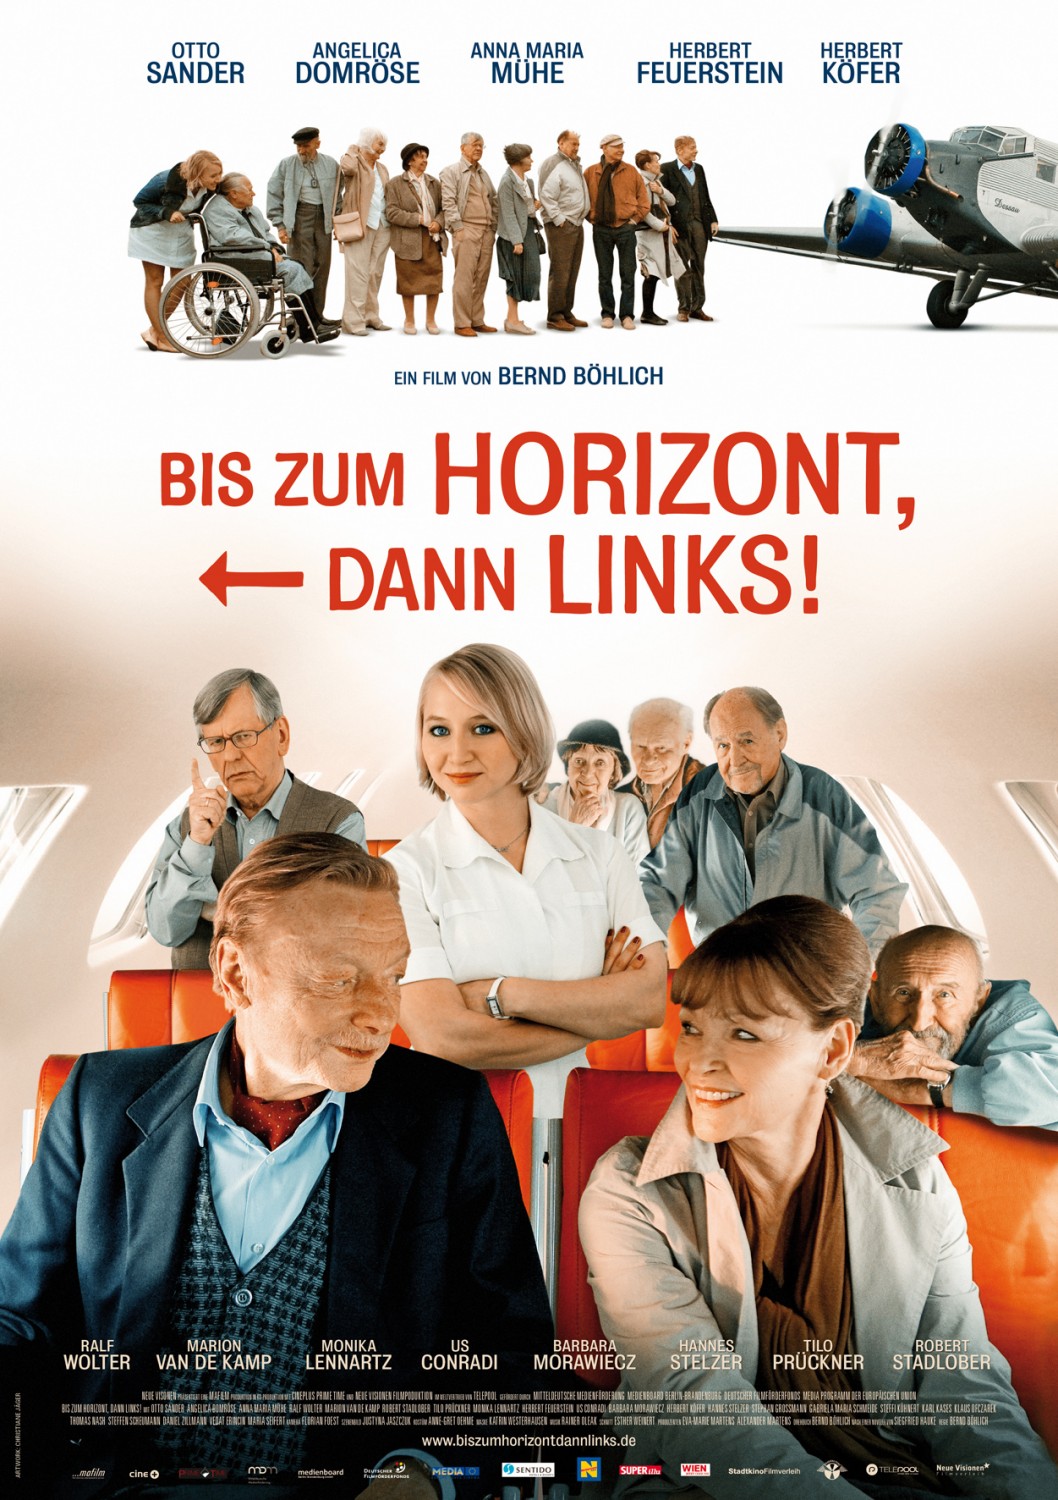 Extra Large Movie Poster Image for Bis zum Horizont, dann links! 